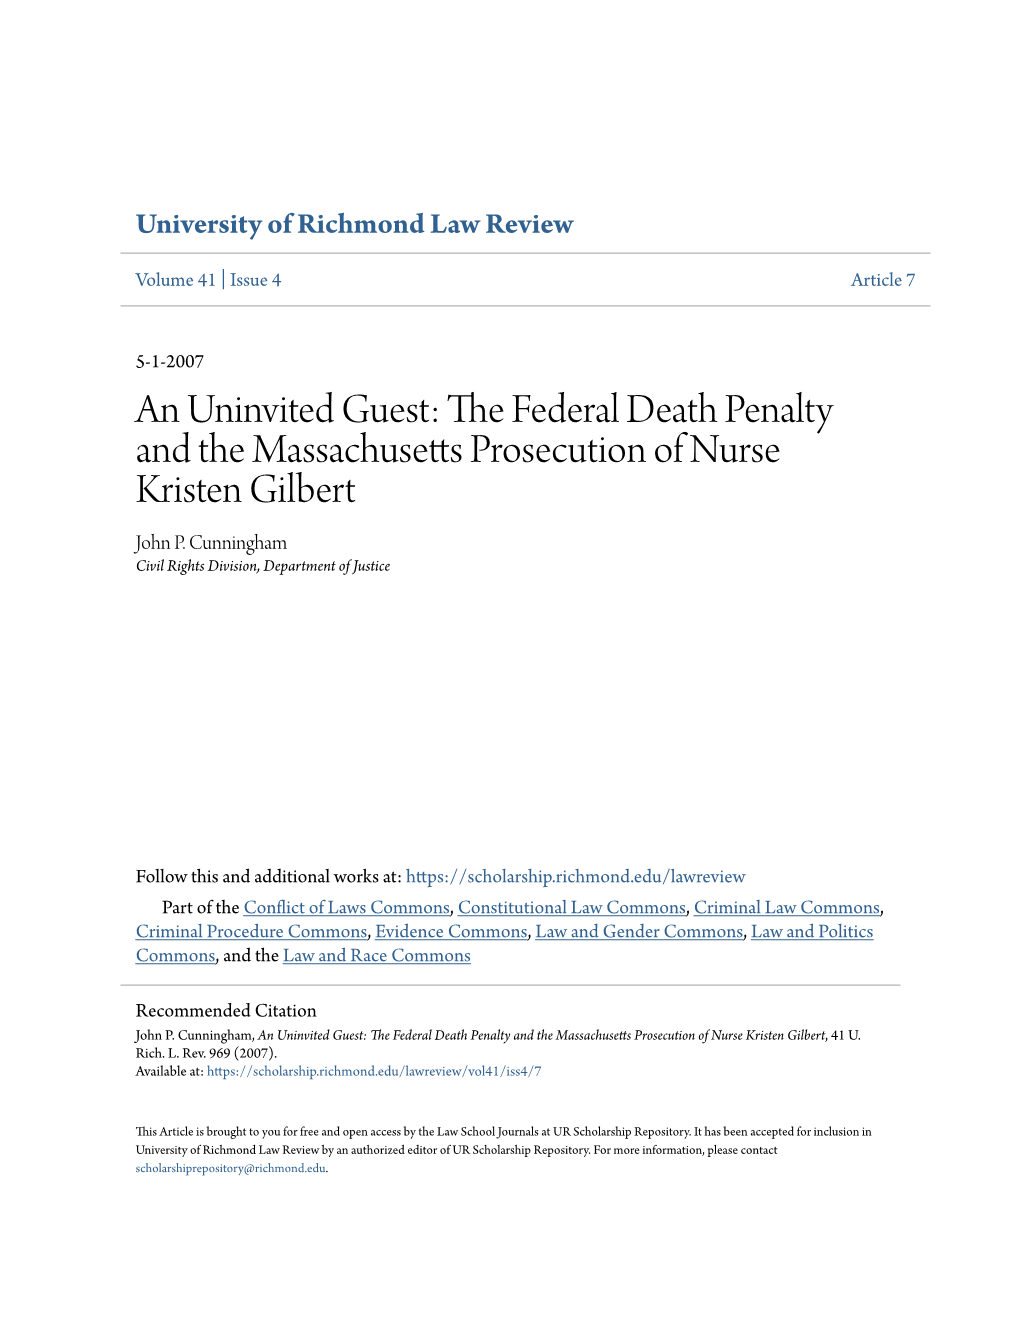 An Uninvited Guest: the Federal Death Penalty and the Massachusetts Prosecution of Nurse Kristen Gilbert, 41 U